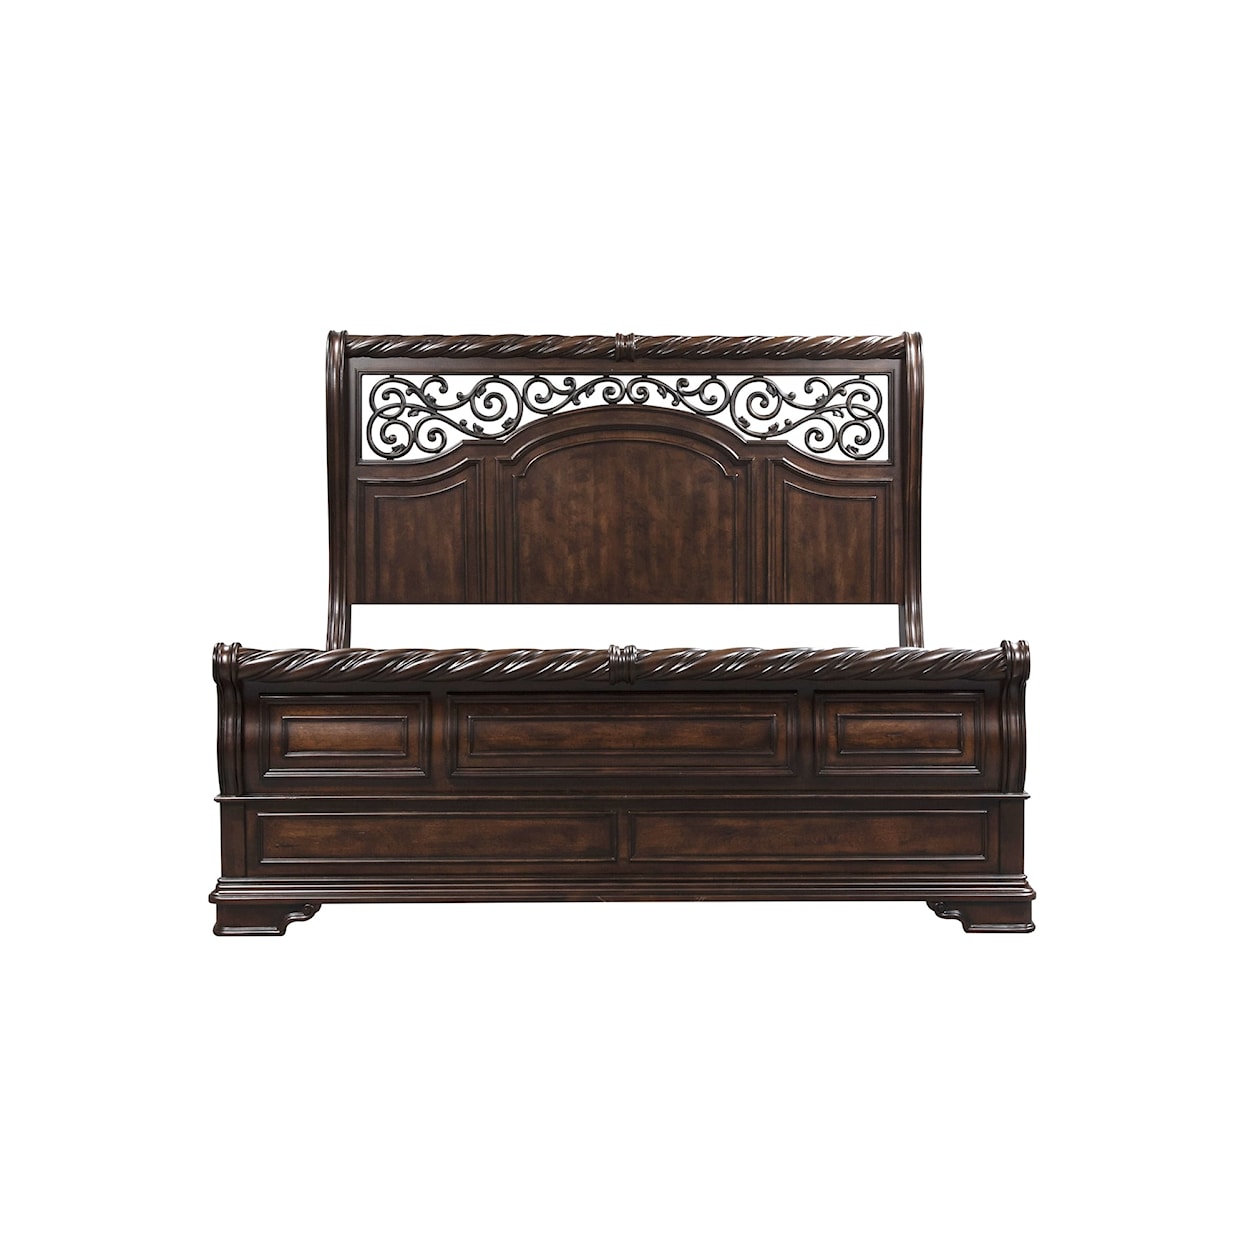 Liberty Furniture Arbor Place King Sleigh Bed